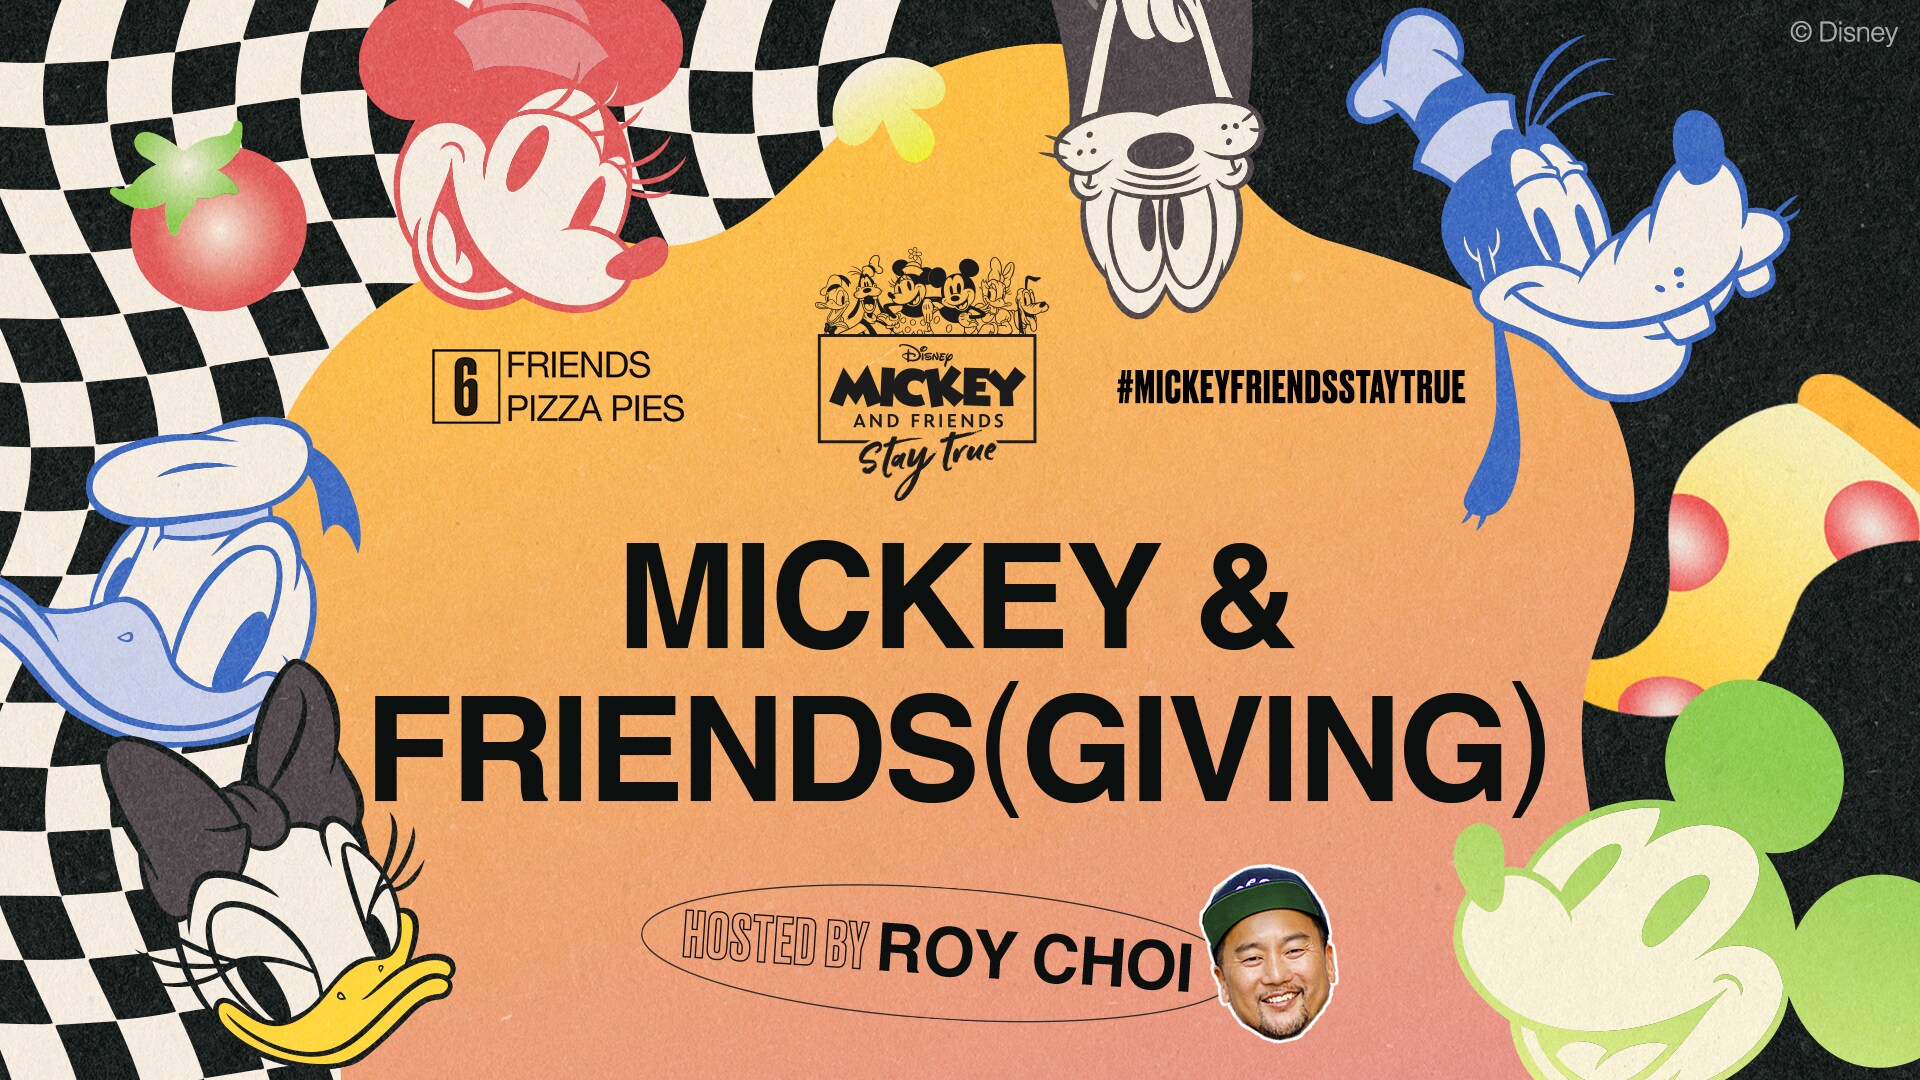 Celebrate Mickey & Friends(giving) with Roy Choi